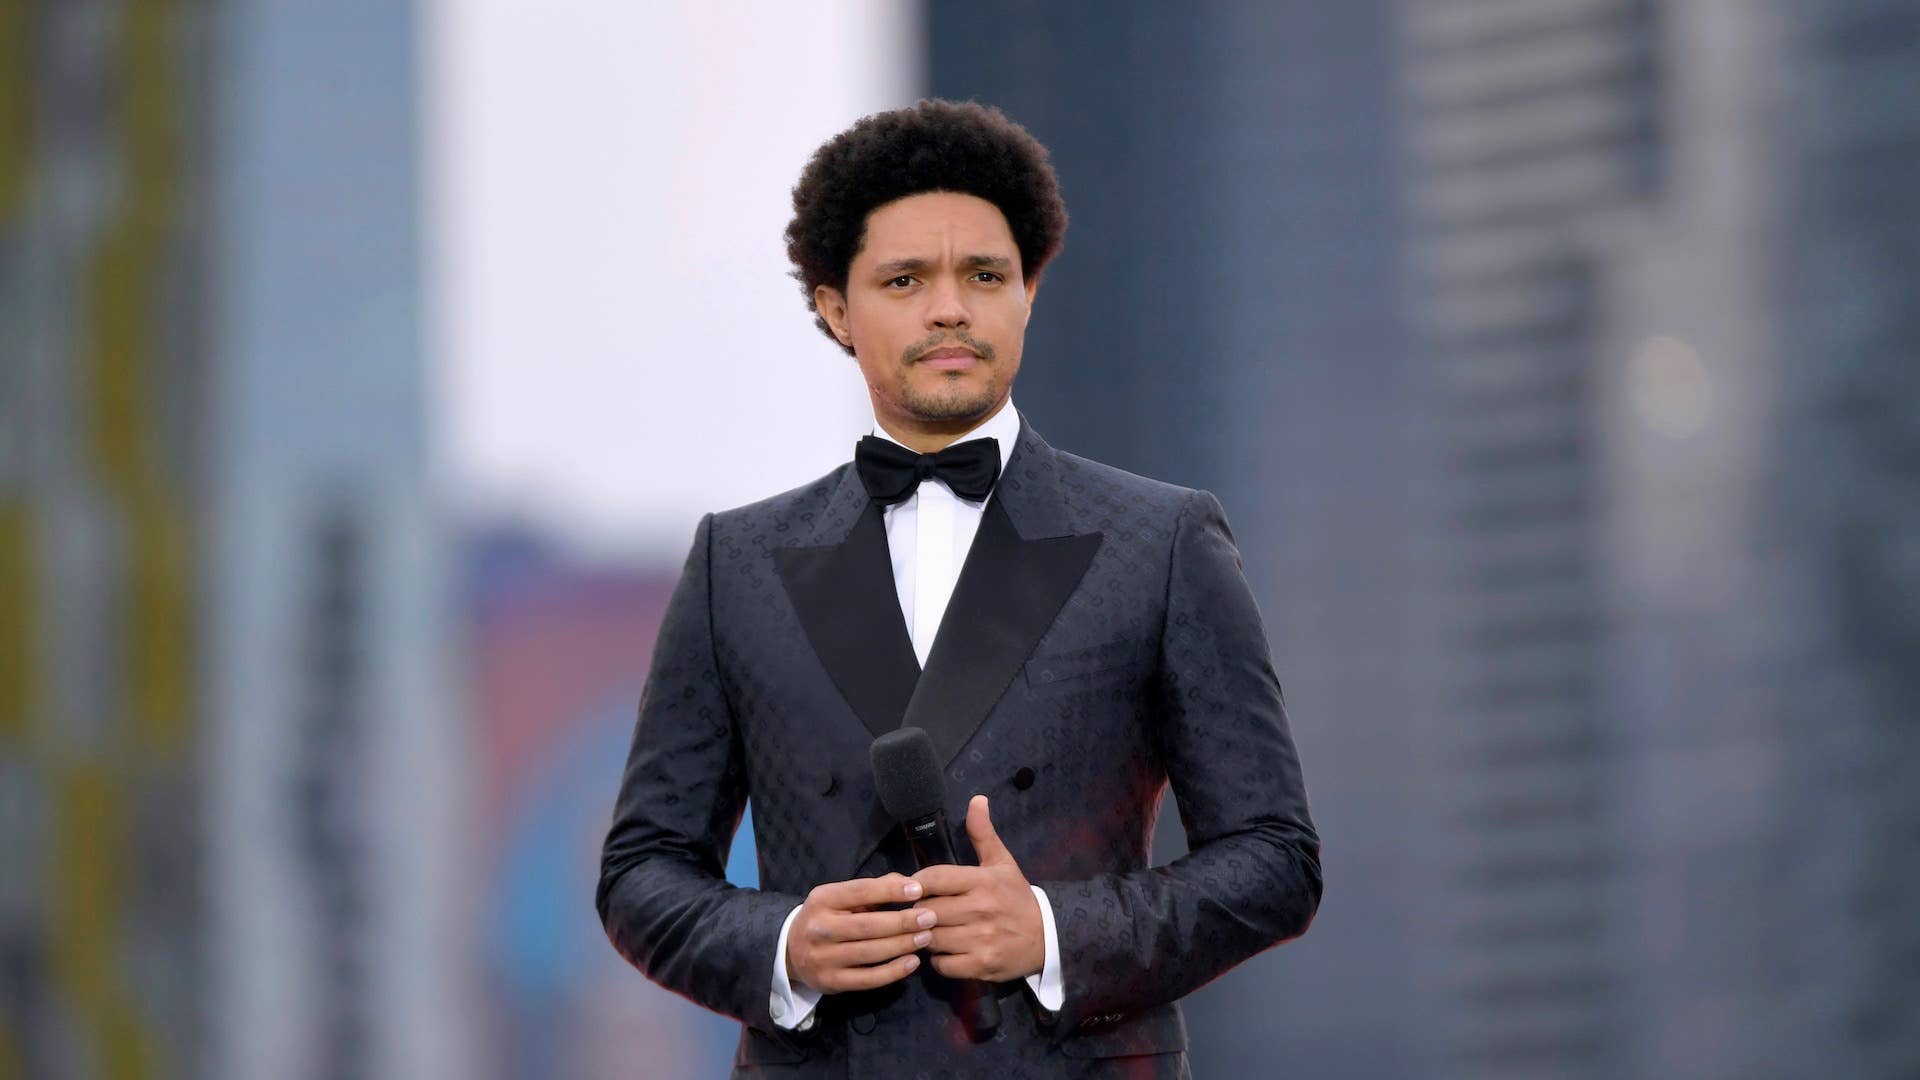 Trevor Noah speaks onstage at the 64th Annual GRAMMY Awards